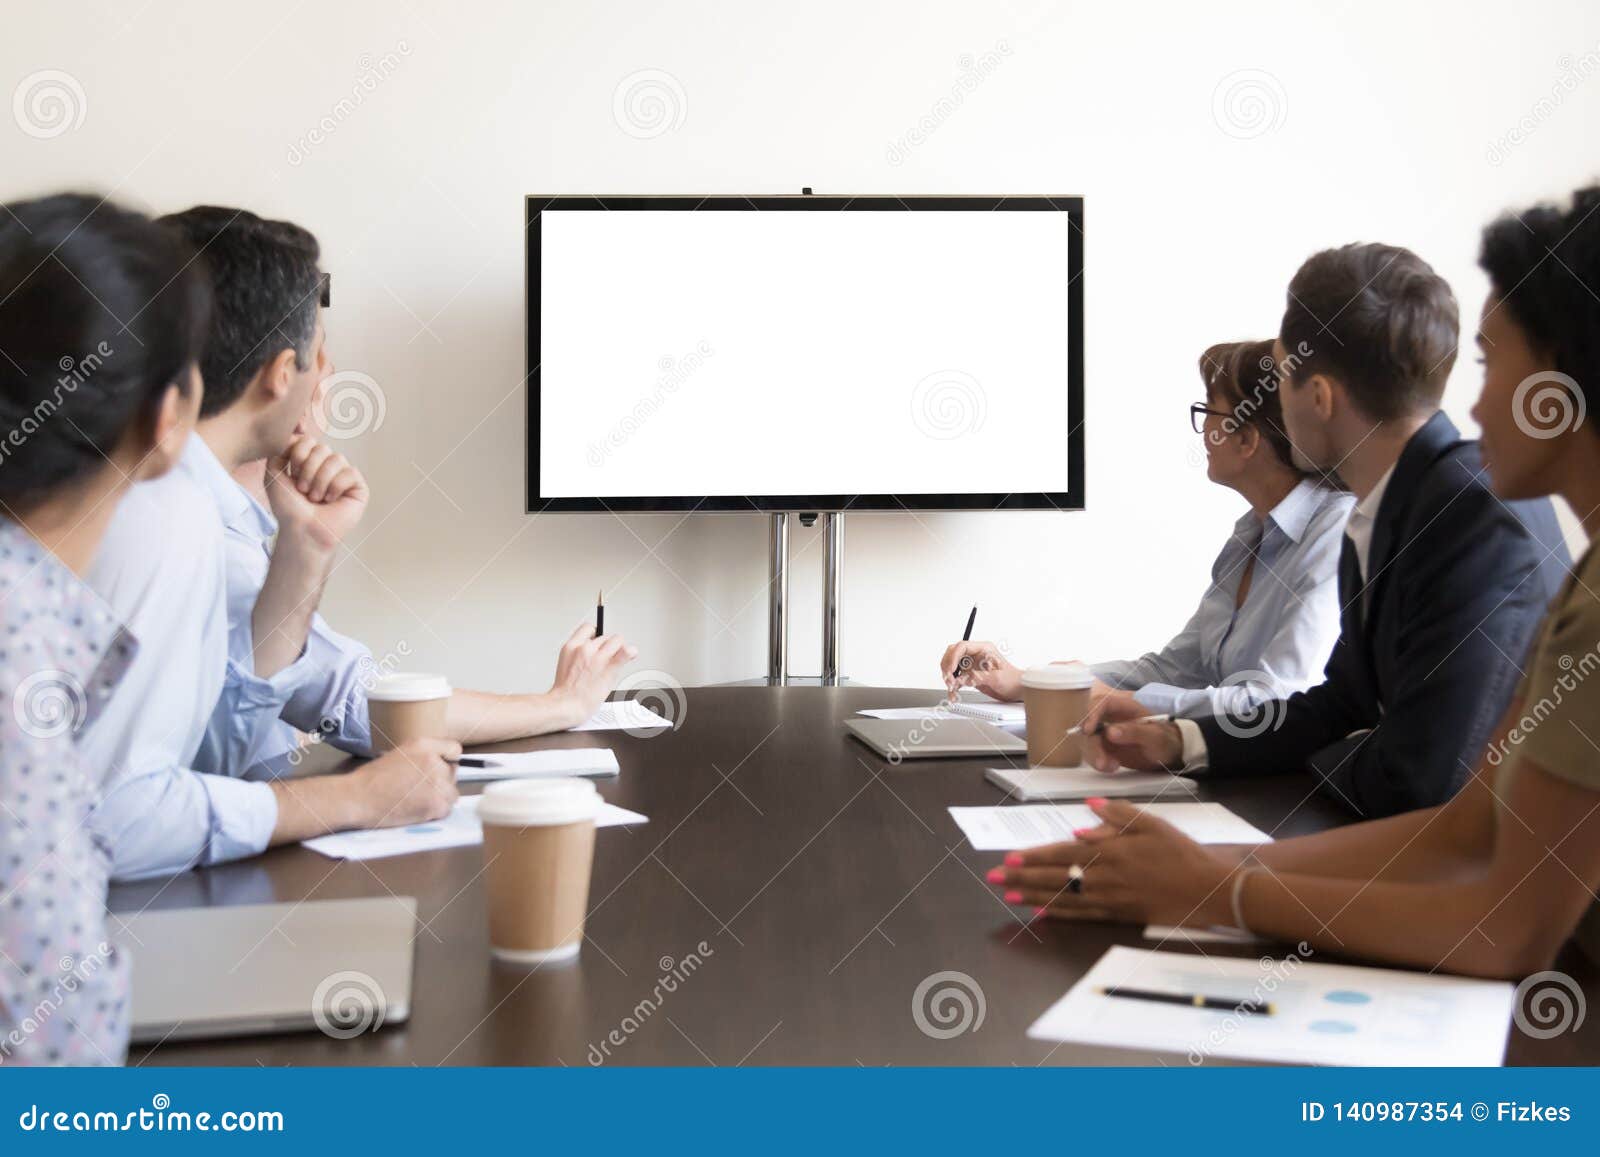 business people group sitting at conference table looking at screen